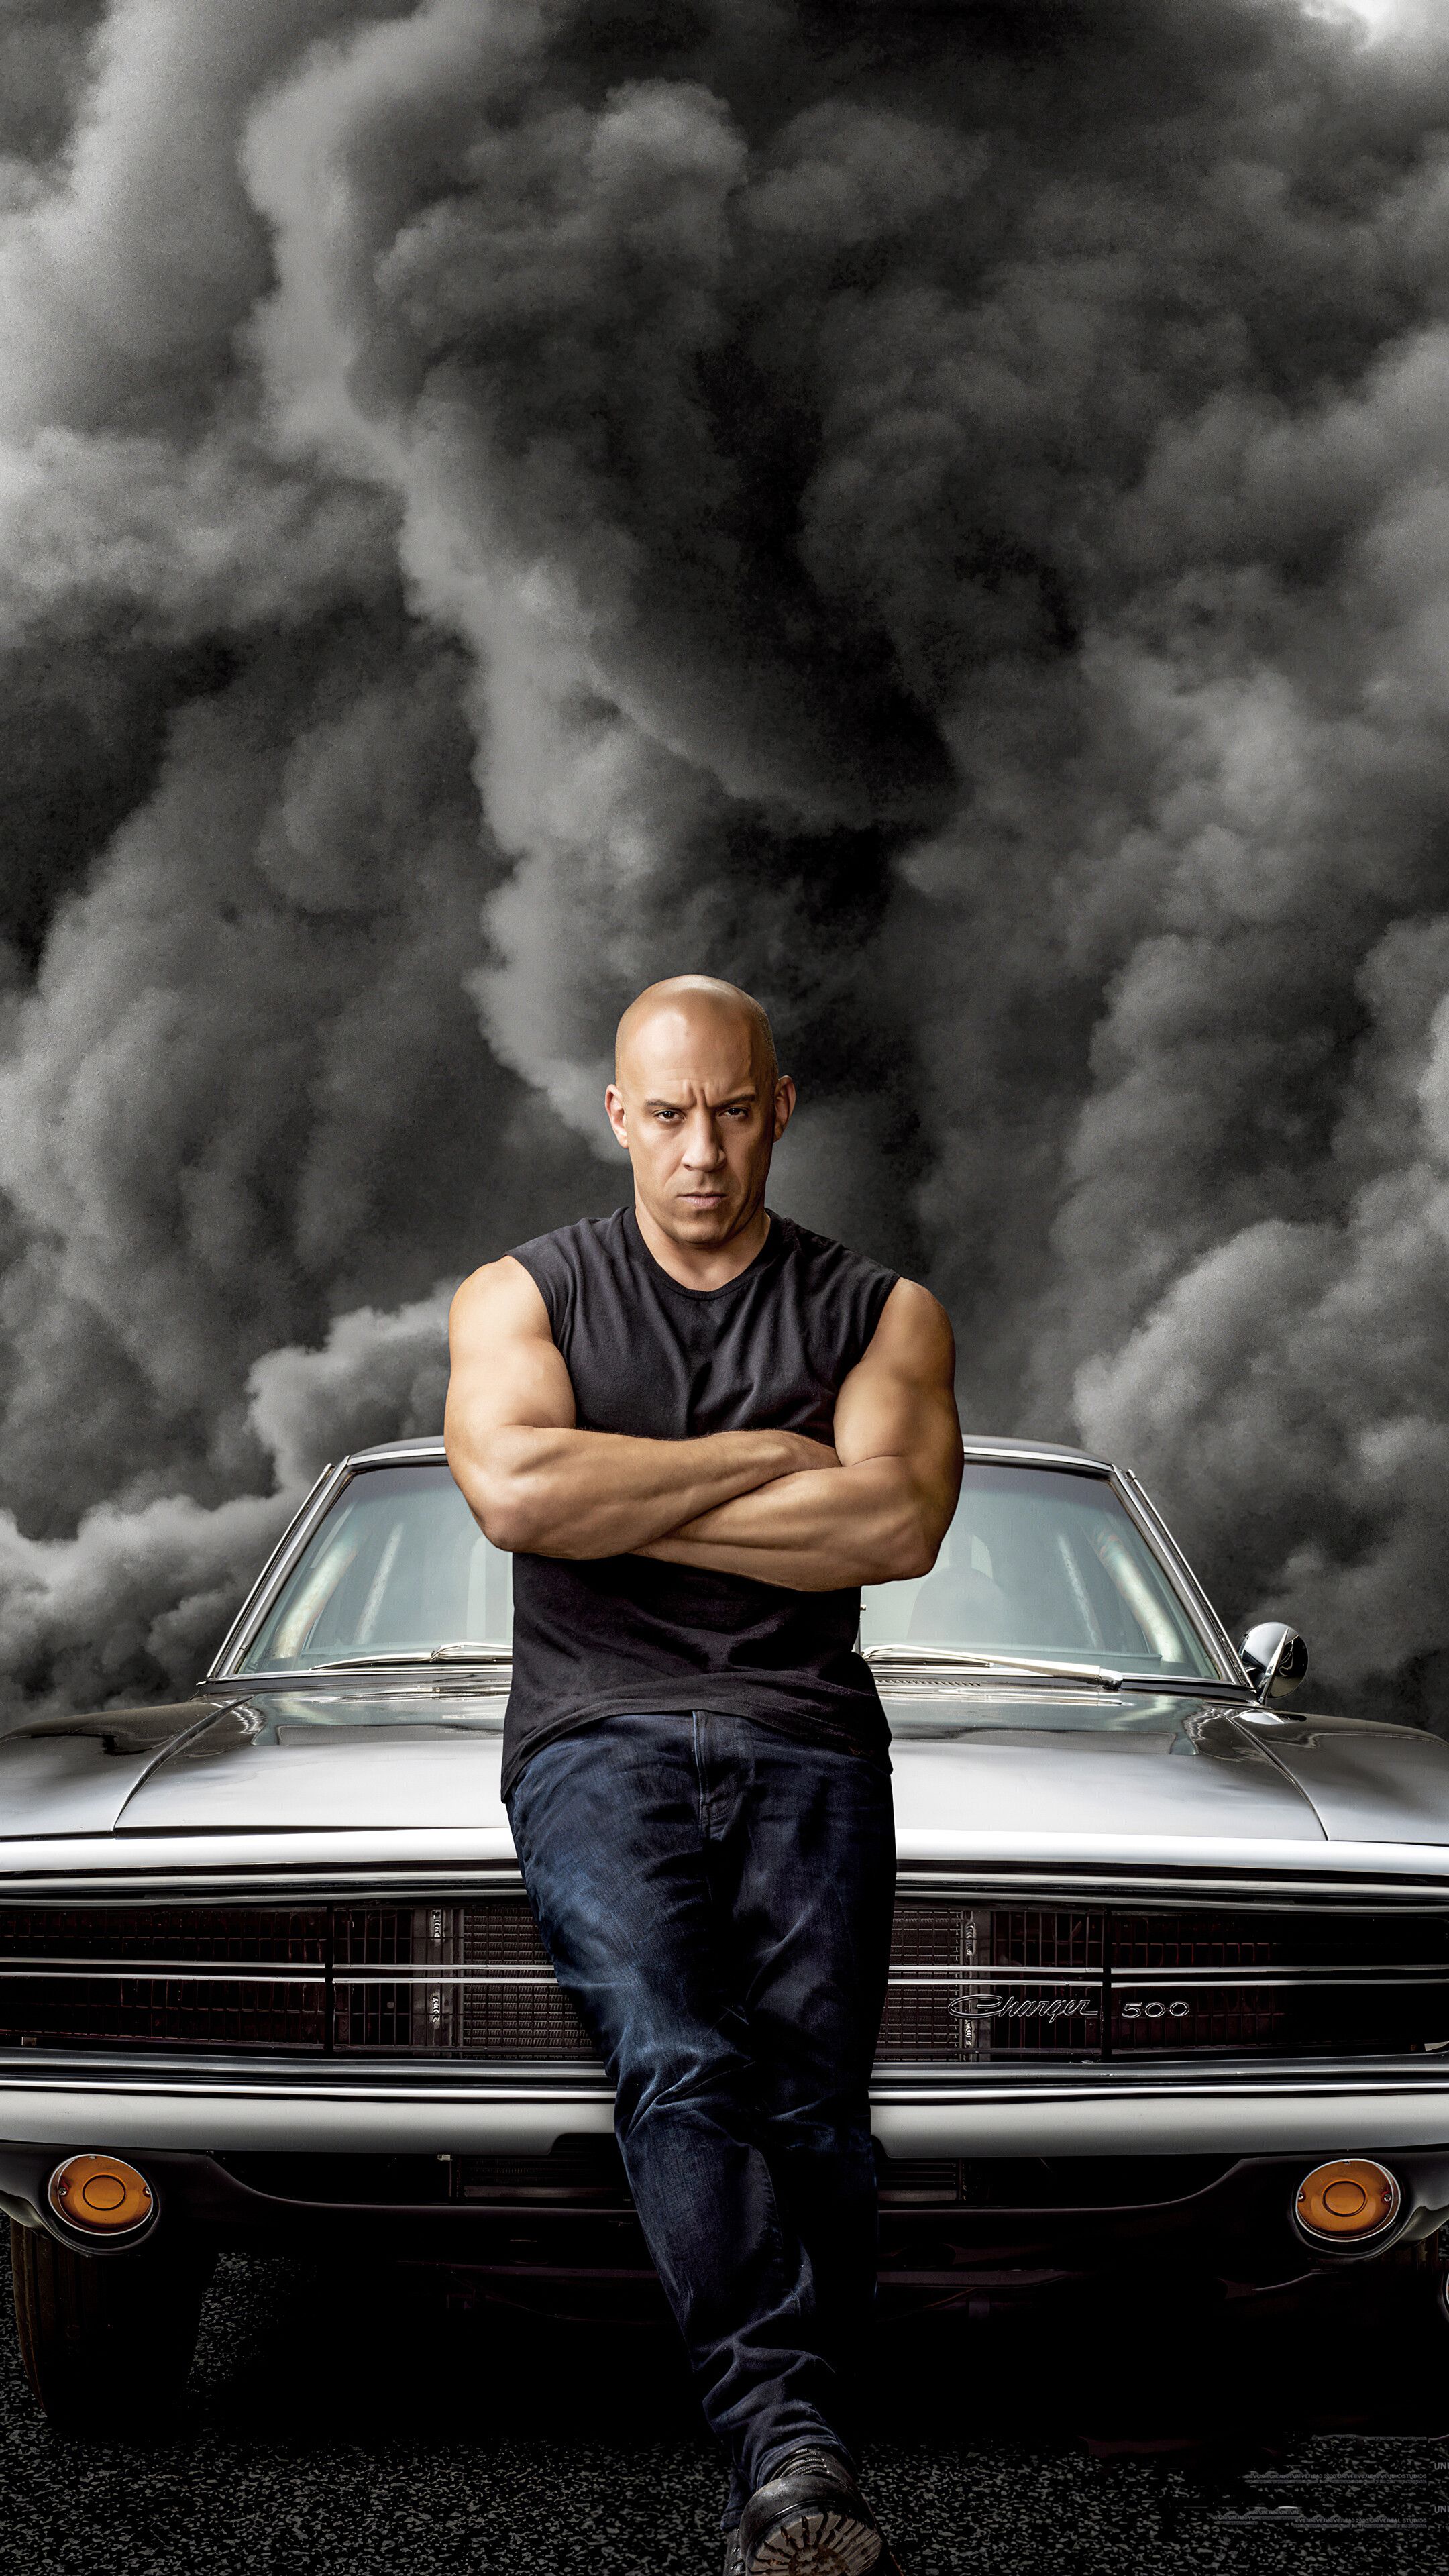 Fast and Furious Dominic Toretto, Poster, Vin Diesel, 4K phone HD Wallpaper, Image, Background, Photo and Picture. Mocah HD Wallpaper